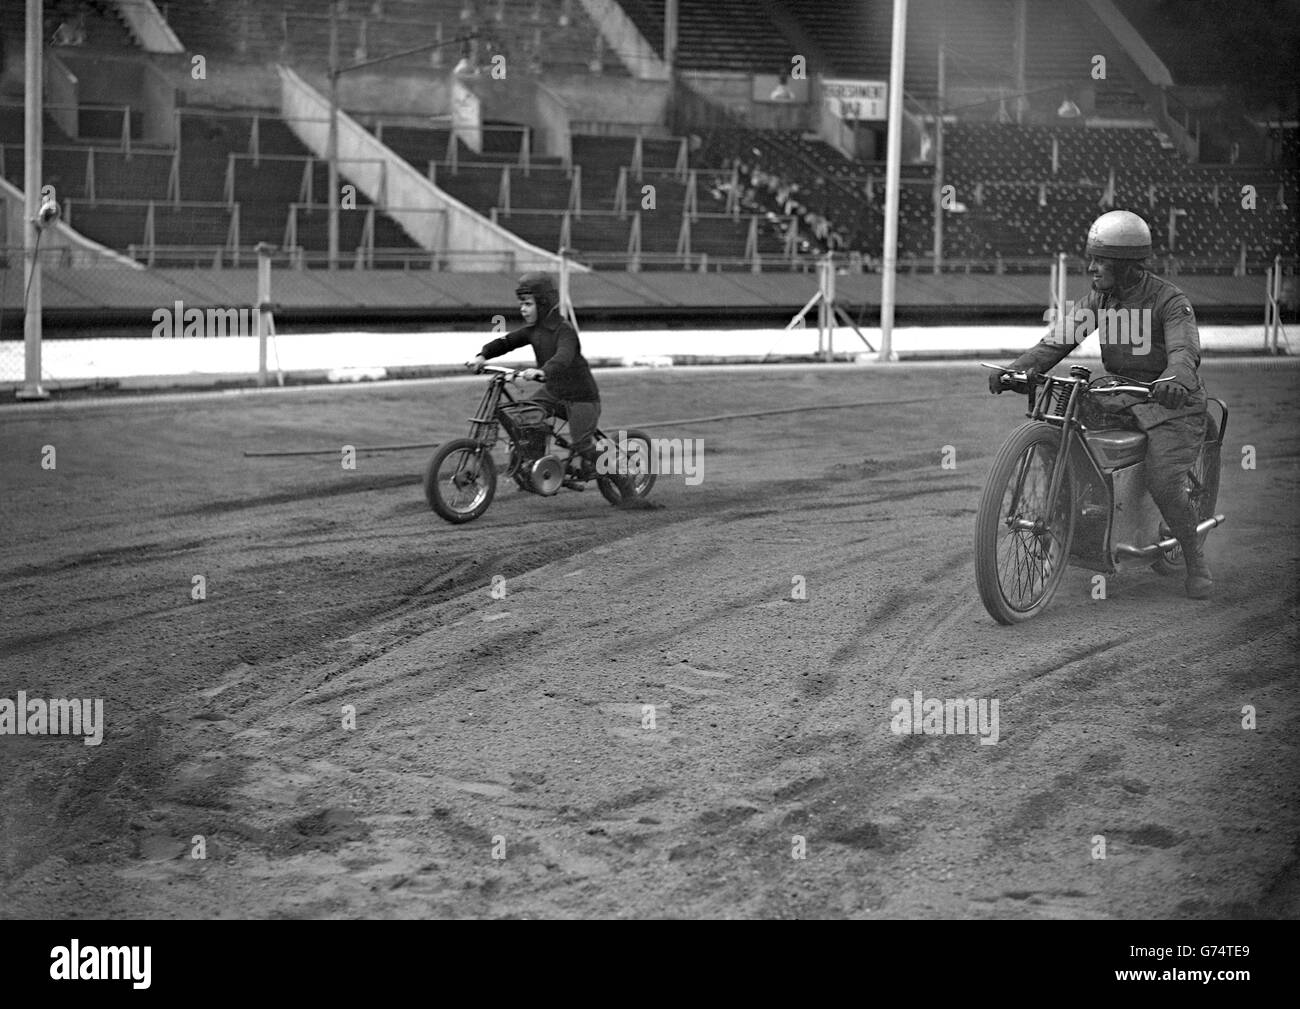 Walter Brierley, 7, races Yorkshire track racer Eva Asquith at Wembley Stadium. The 1.5 horsepower bike was made for him by his father, also called Walter Brierley, a motor engineer from Wembley. Stock Photo